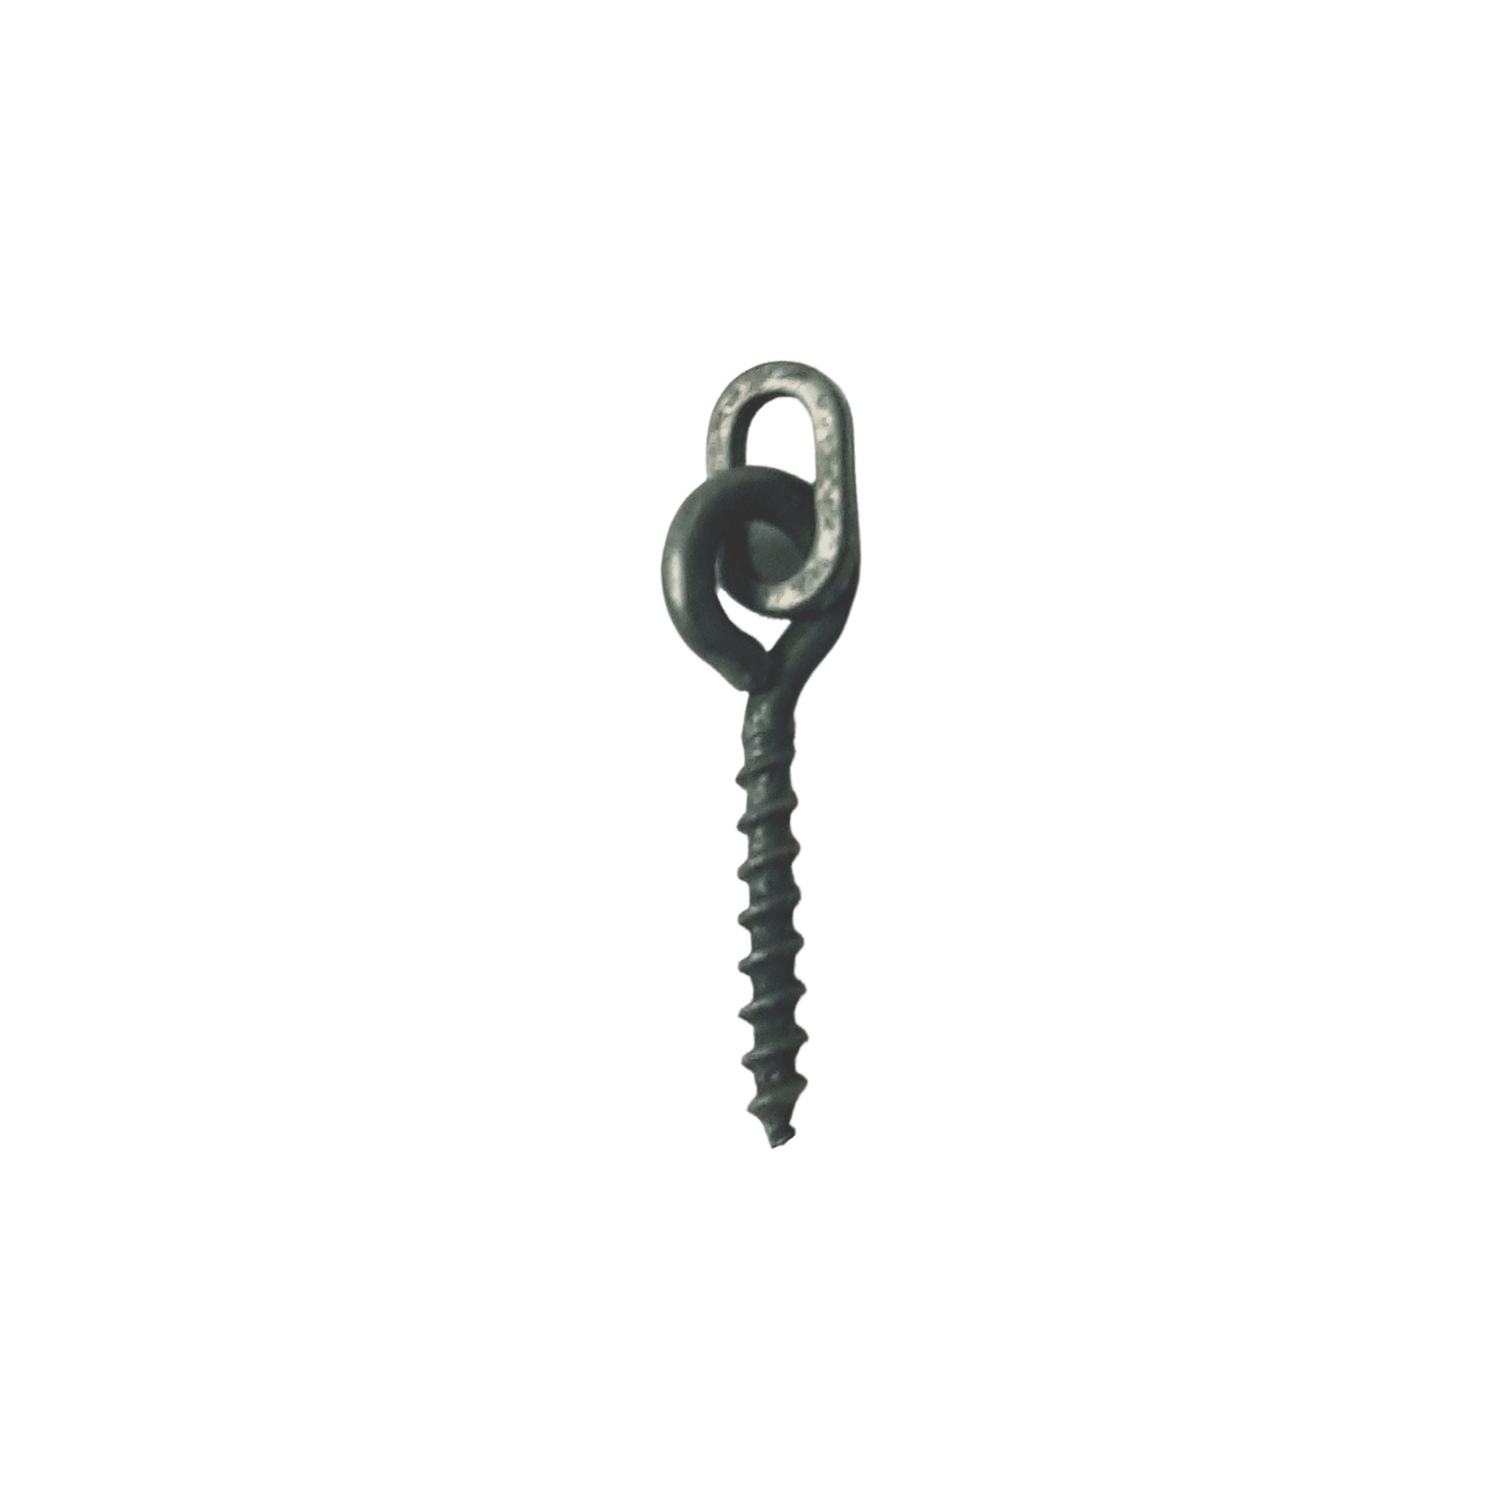 12mm Bait Screw With Oval Link Loop.